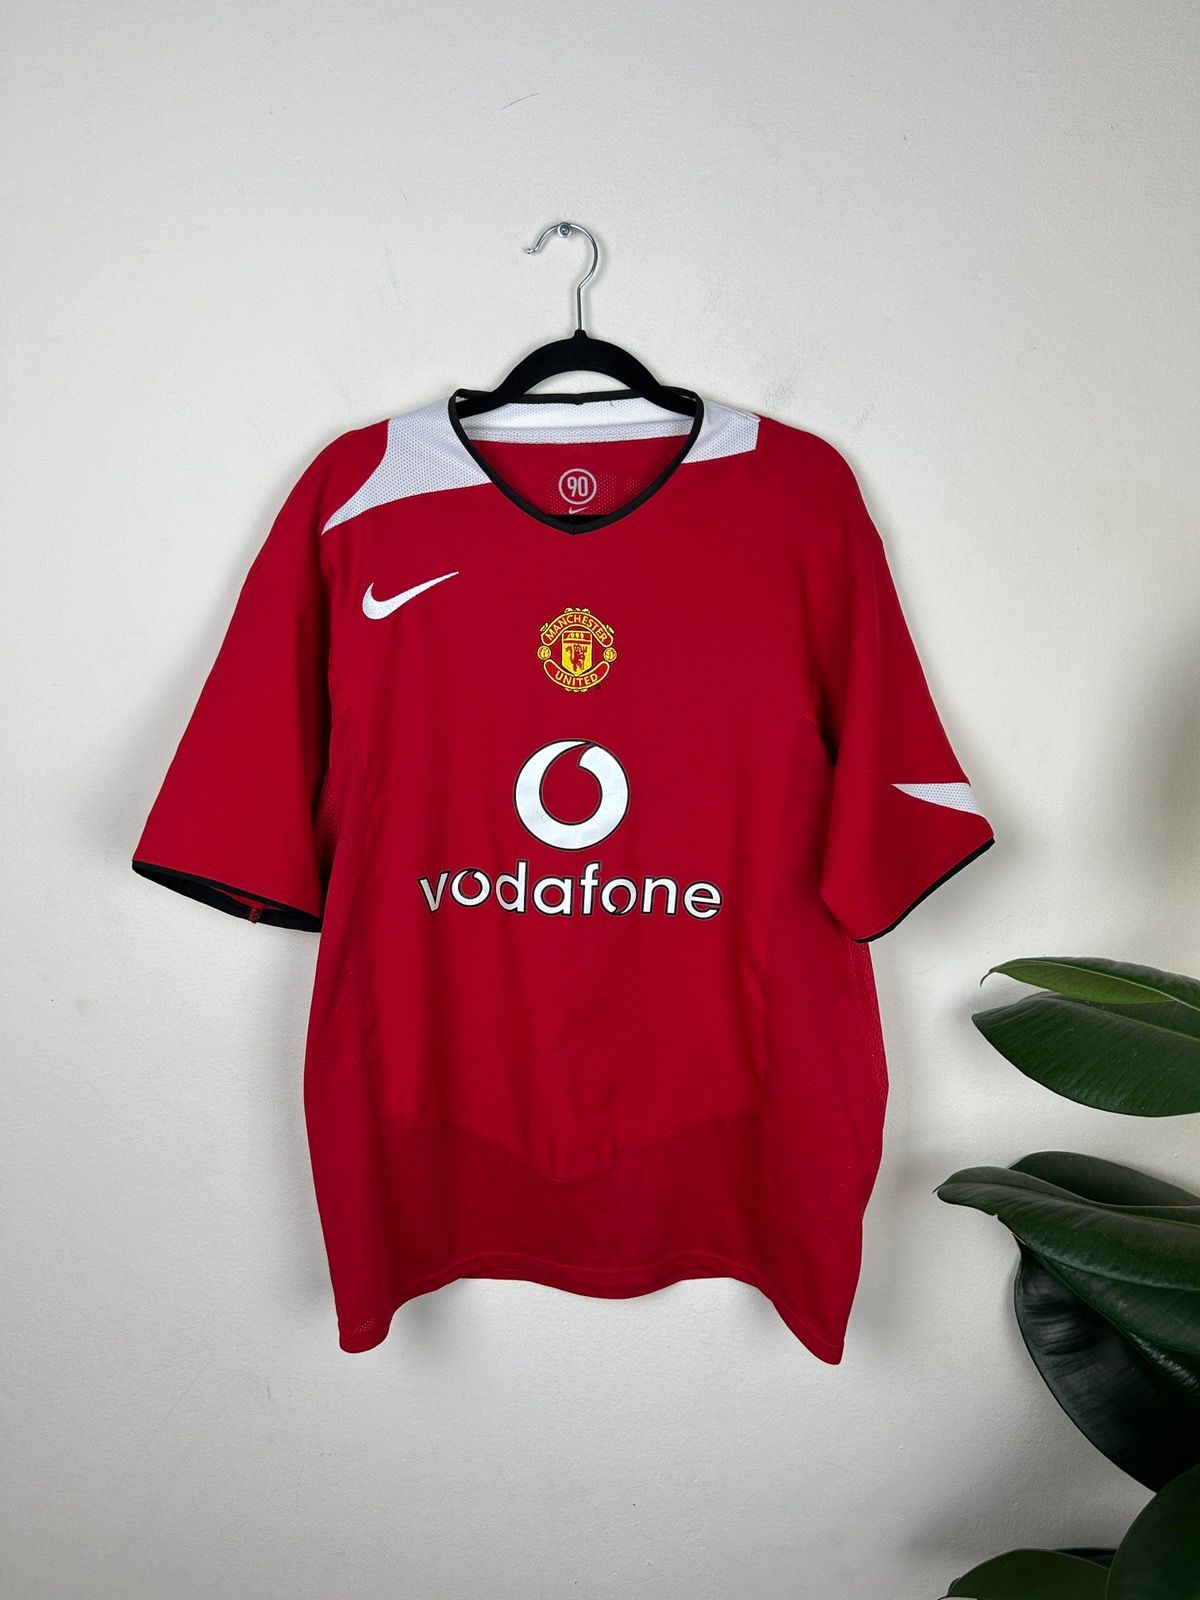 Pre-owned Nike X Soccer Jersey 10 Van Nistelrooy Manchester United 2005/06 In Red